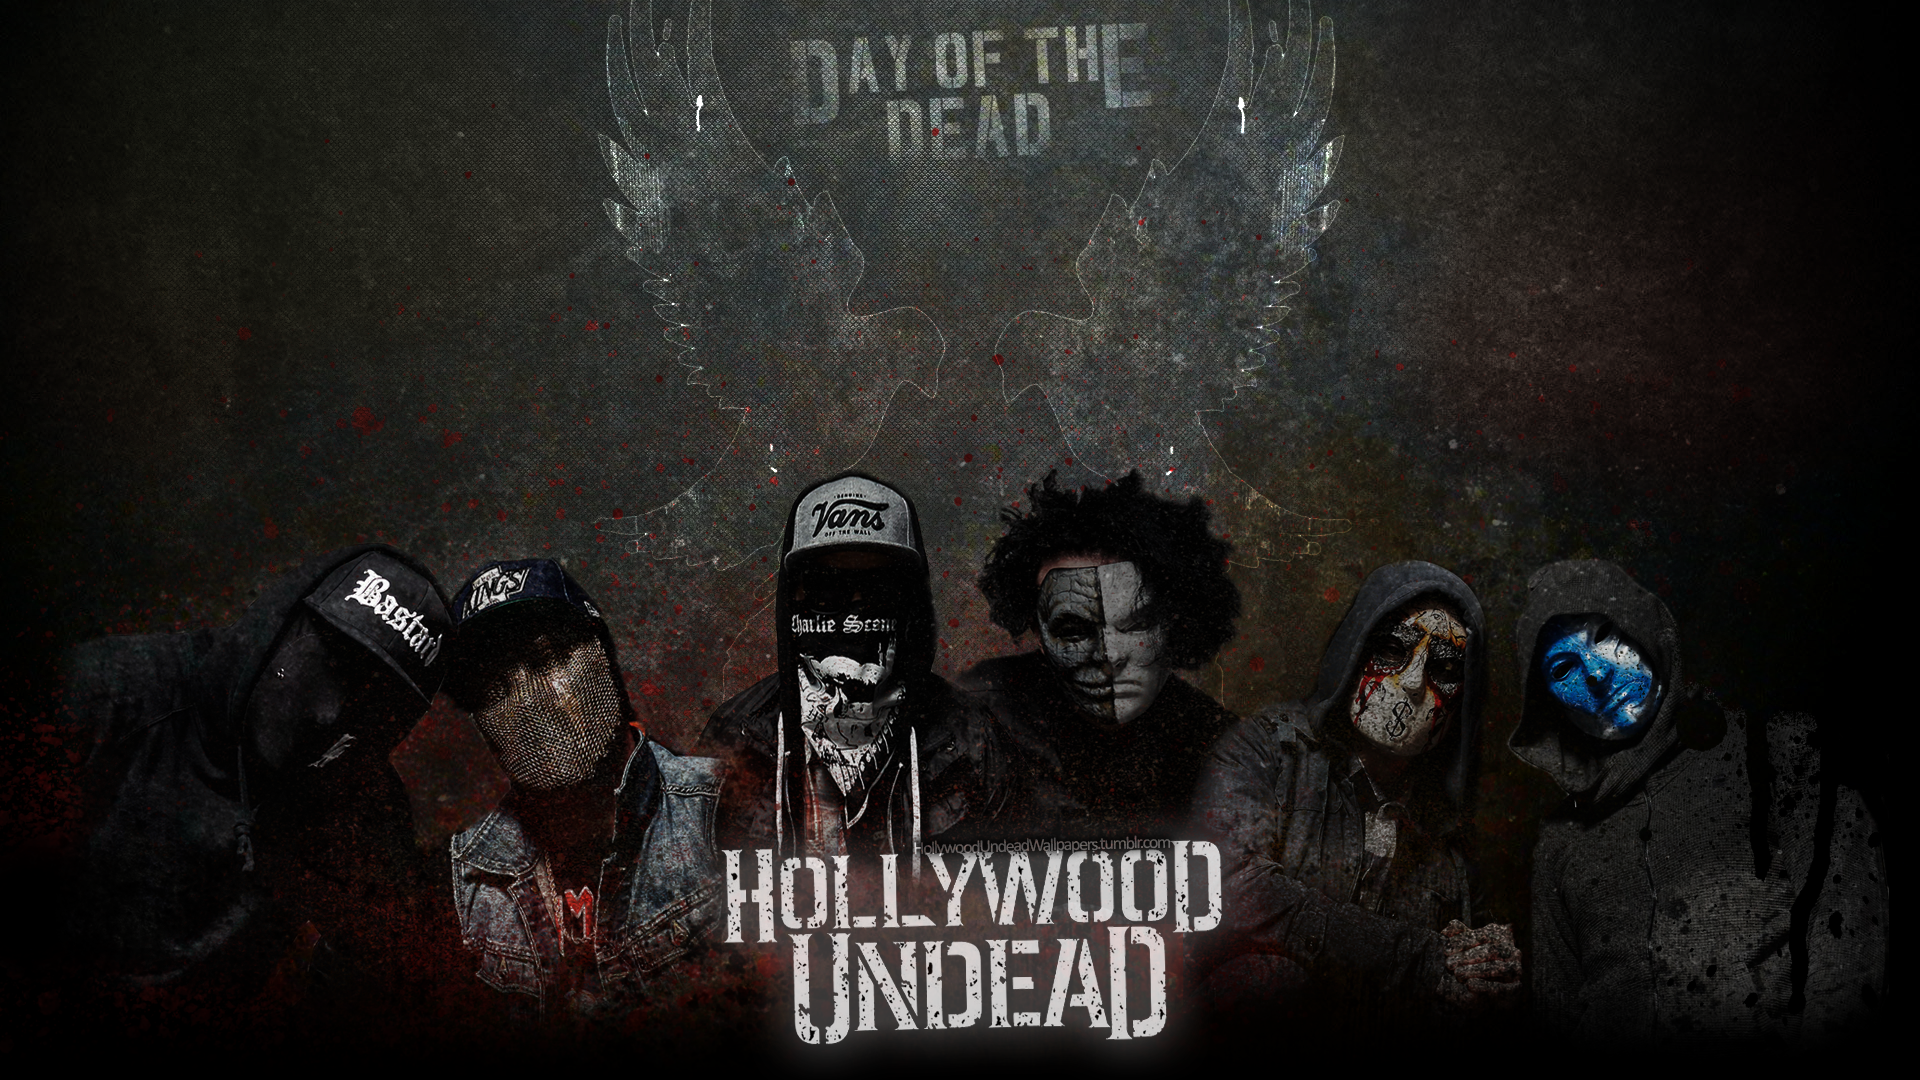 Hollywood Undead   Day of the Dead WP NEW MASKS by emirulug on